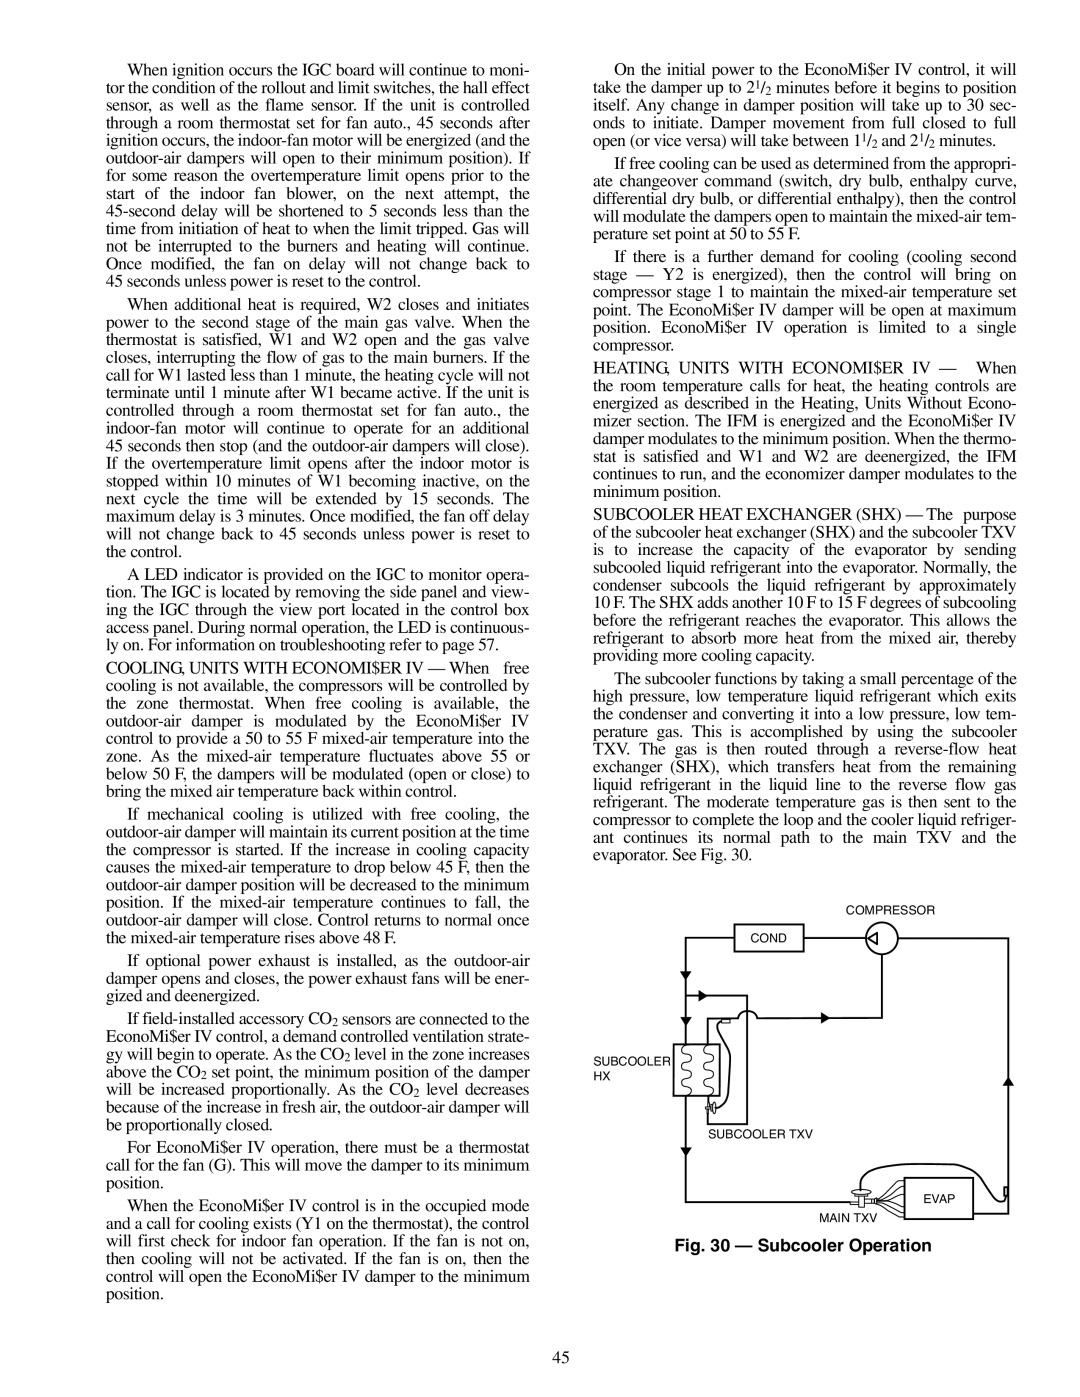 Carrier 48PG20-28 specifications Subcooler Operation 